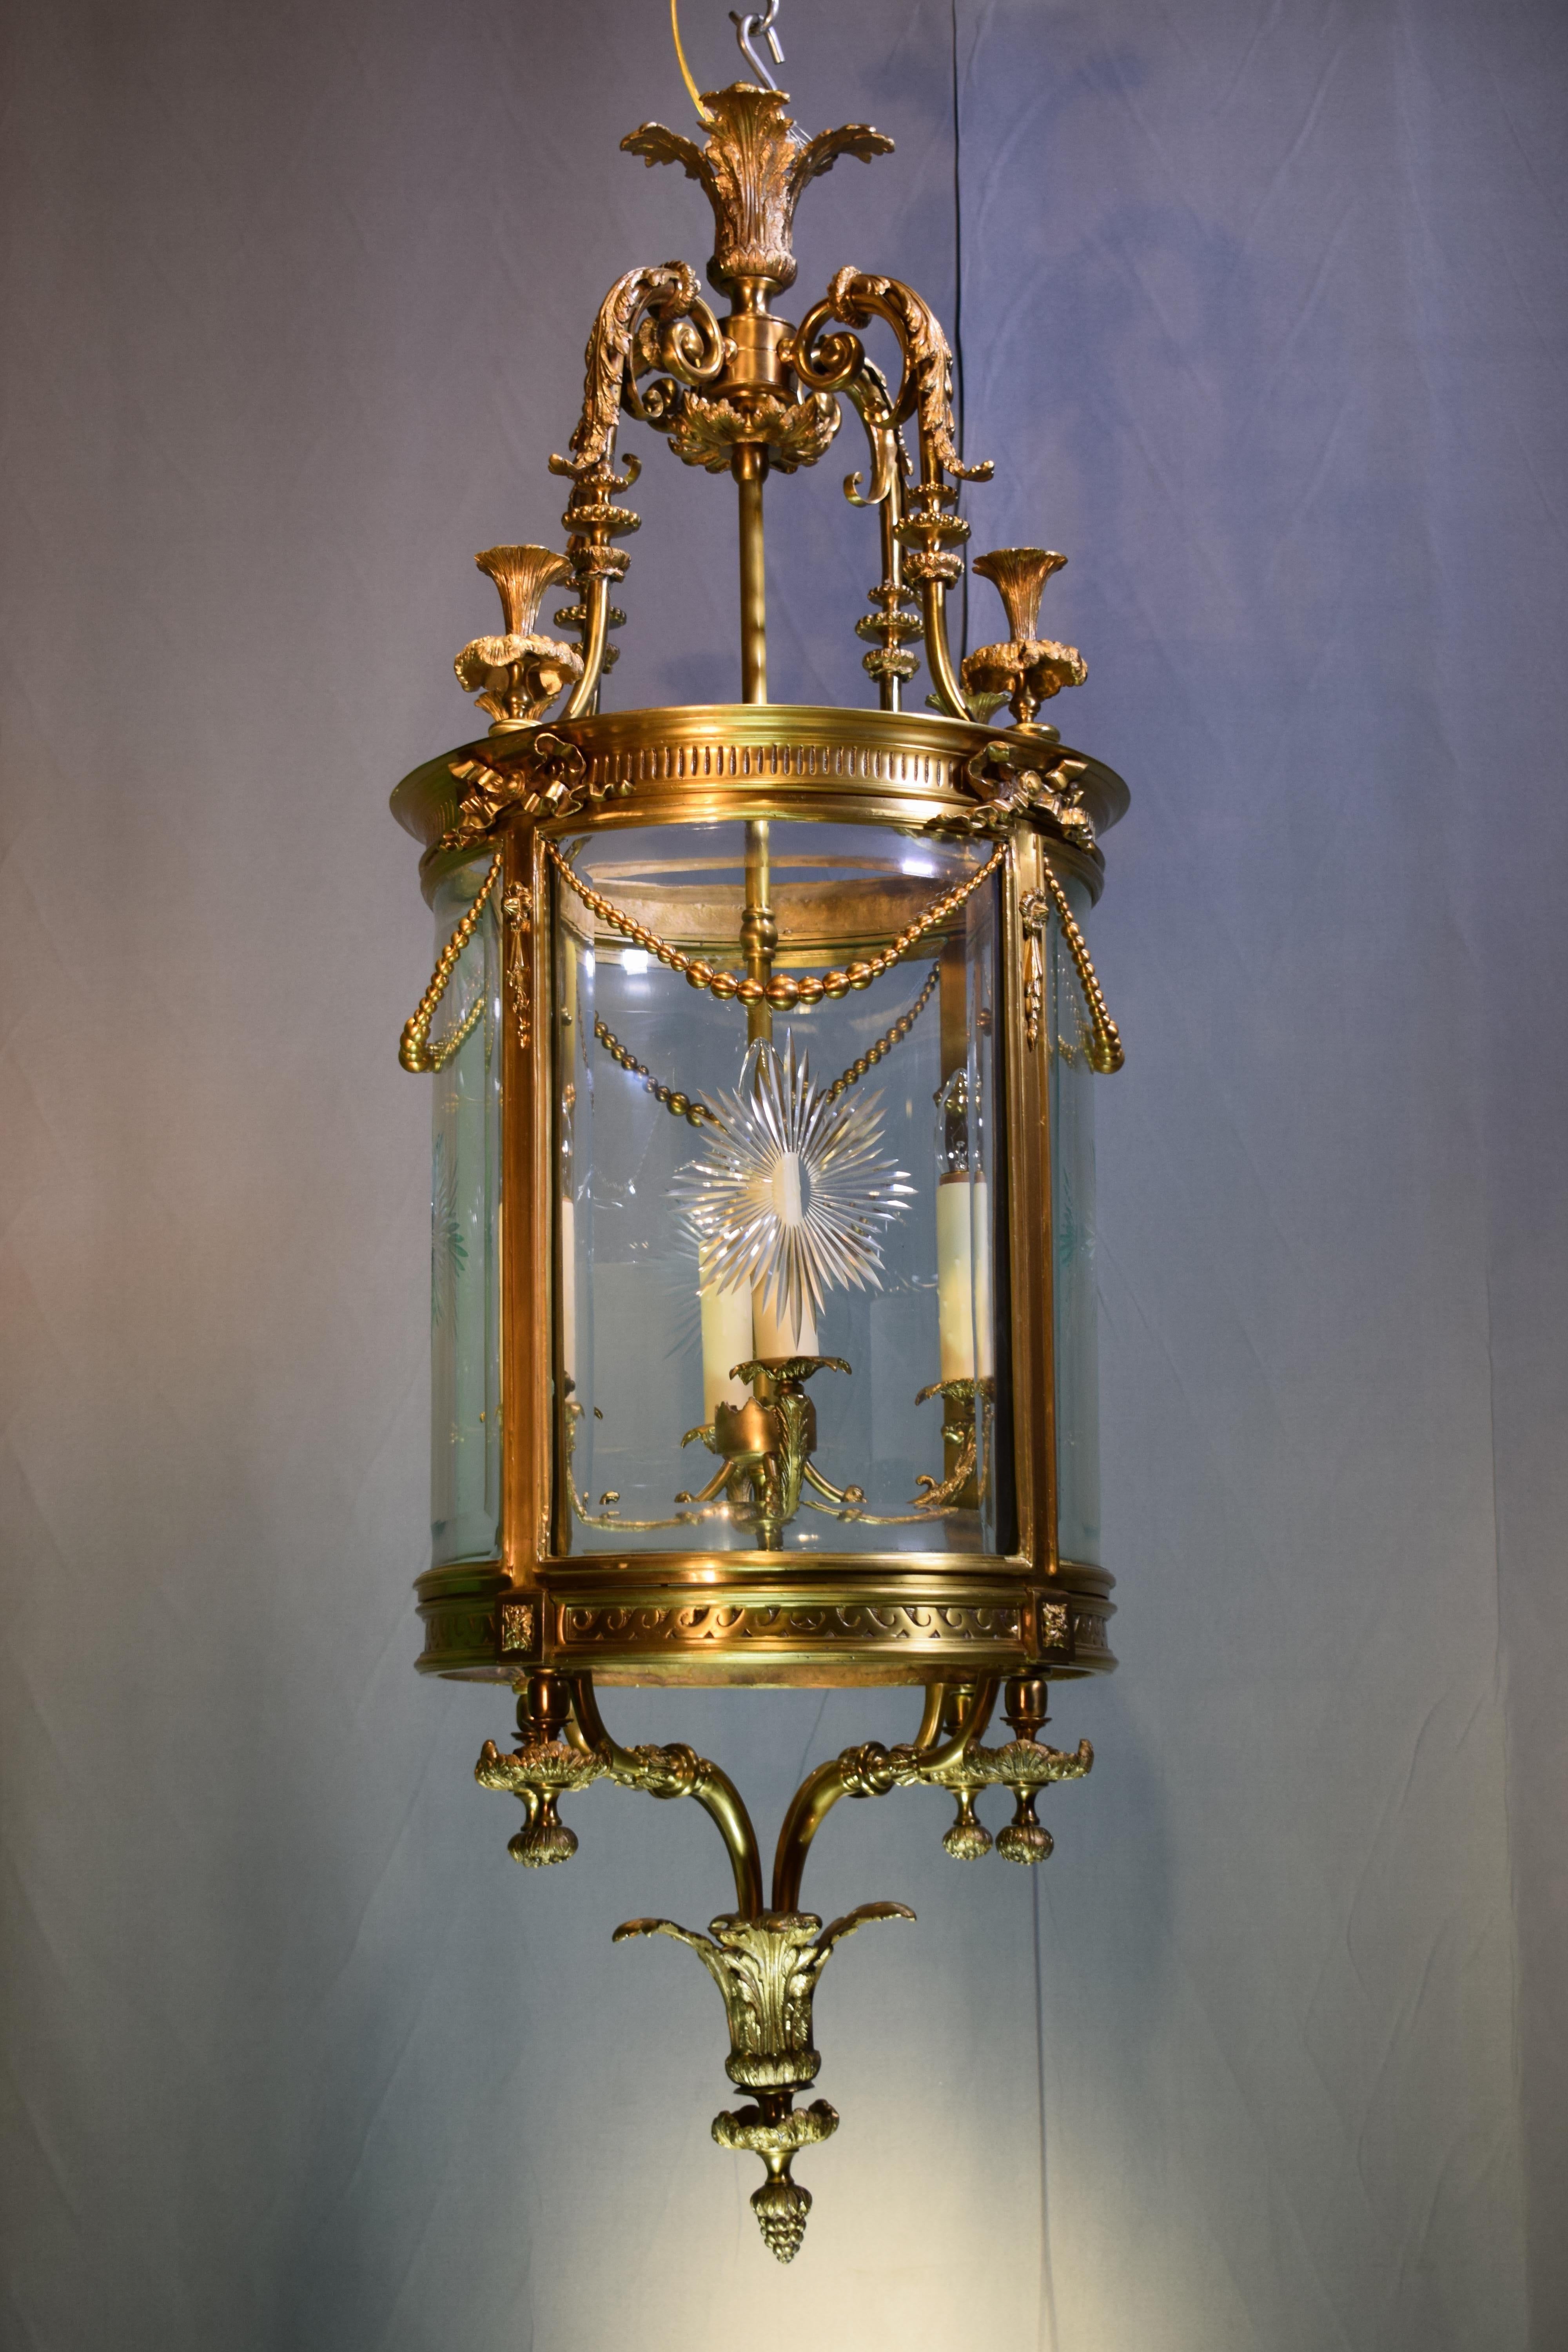 A fine gilt bronze cylindrical lantern with hand-cut, curved and beveled crystal panels. England, circa 1920. 4 Lights
Dimensions: Height 54